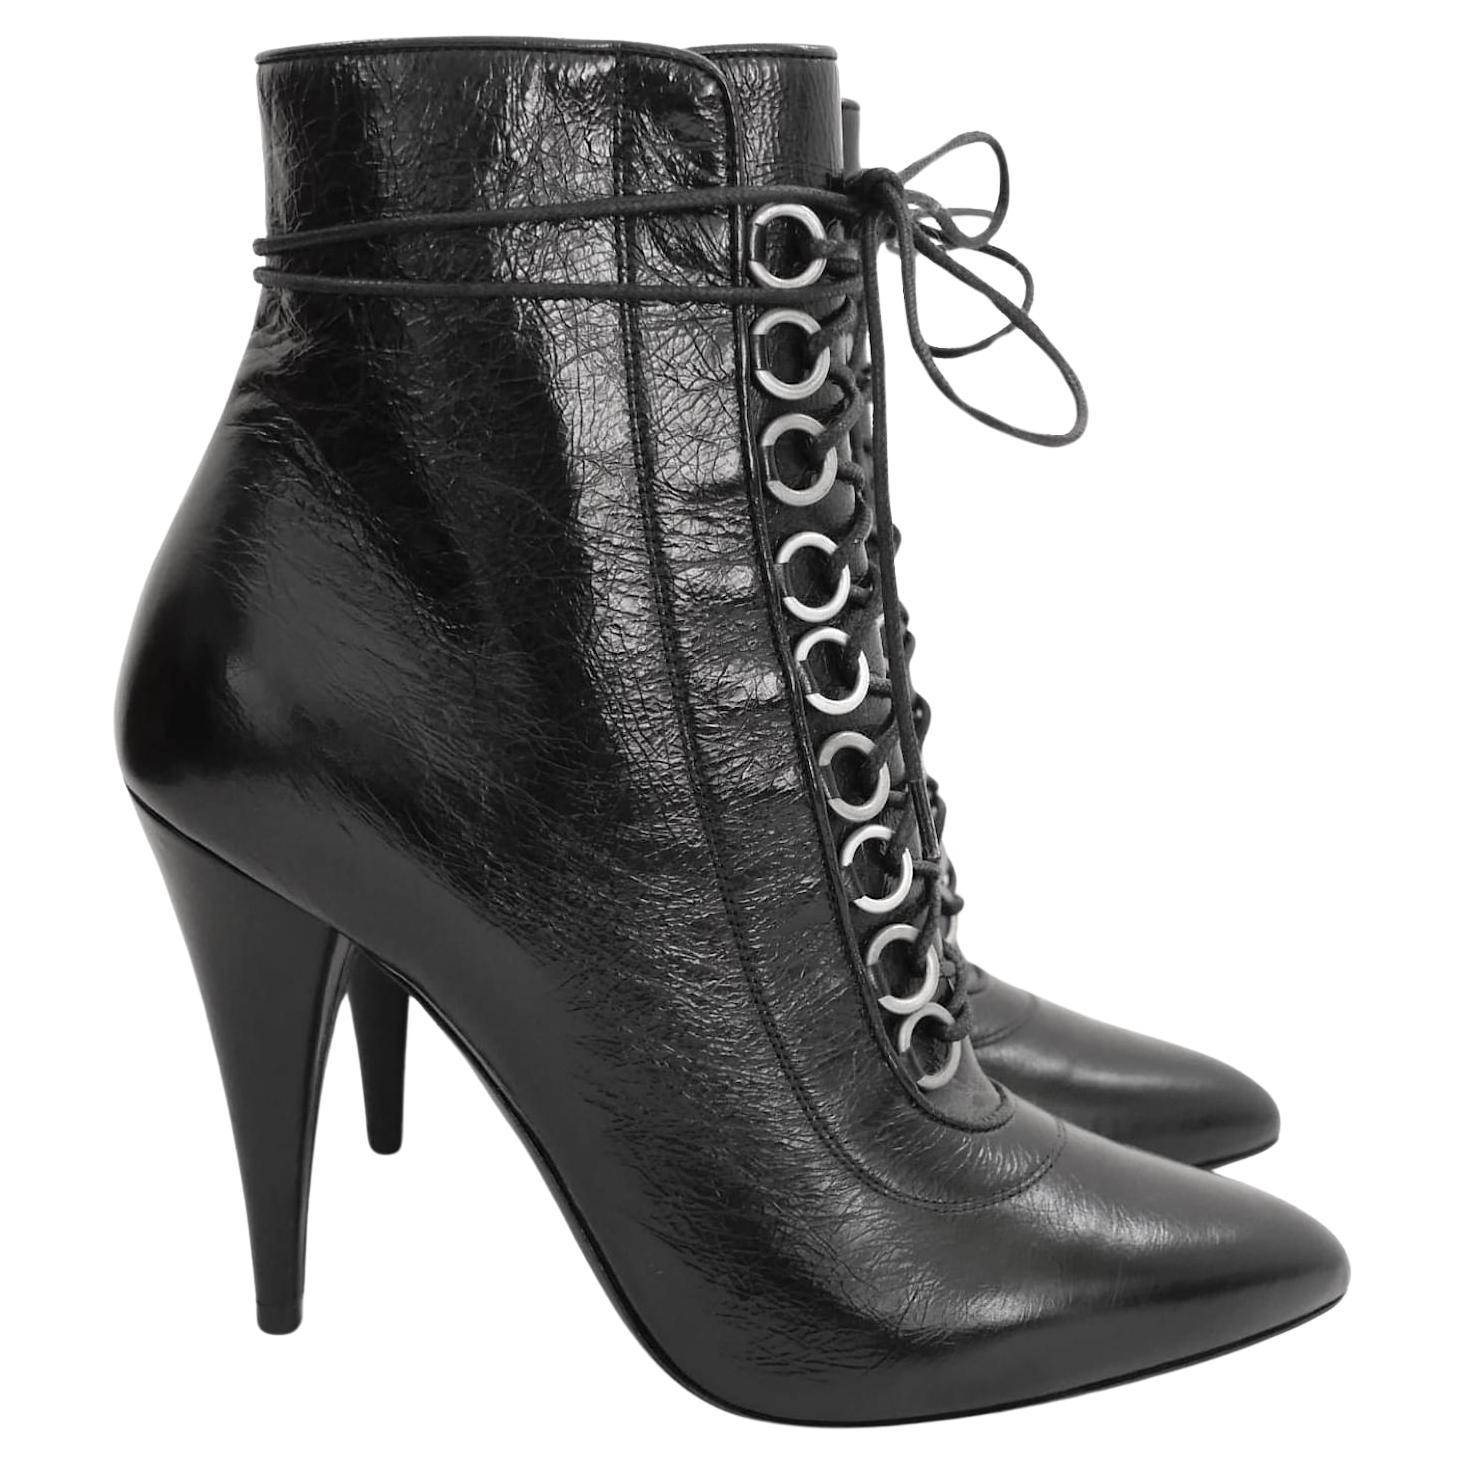 How do I know if Saint Laurent boots are real?